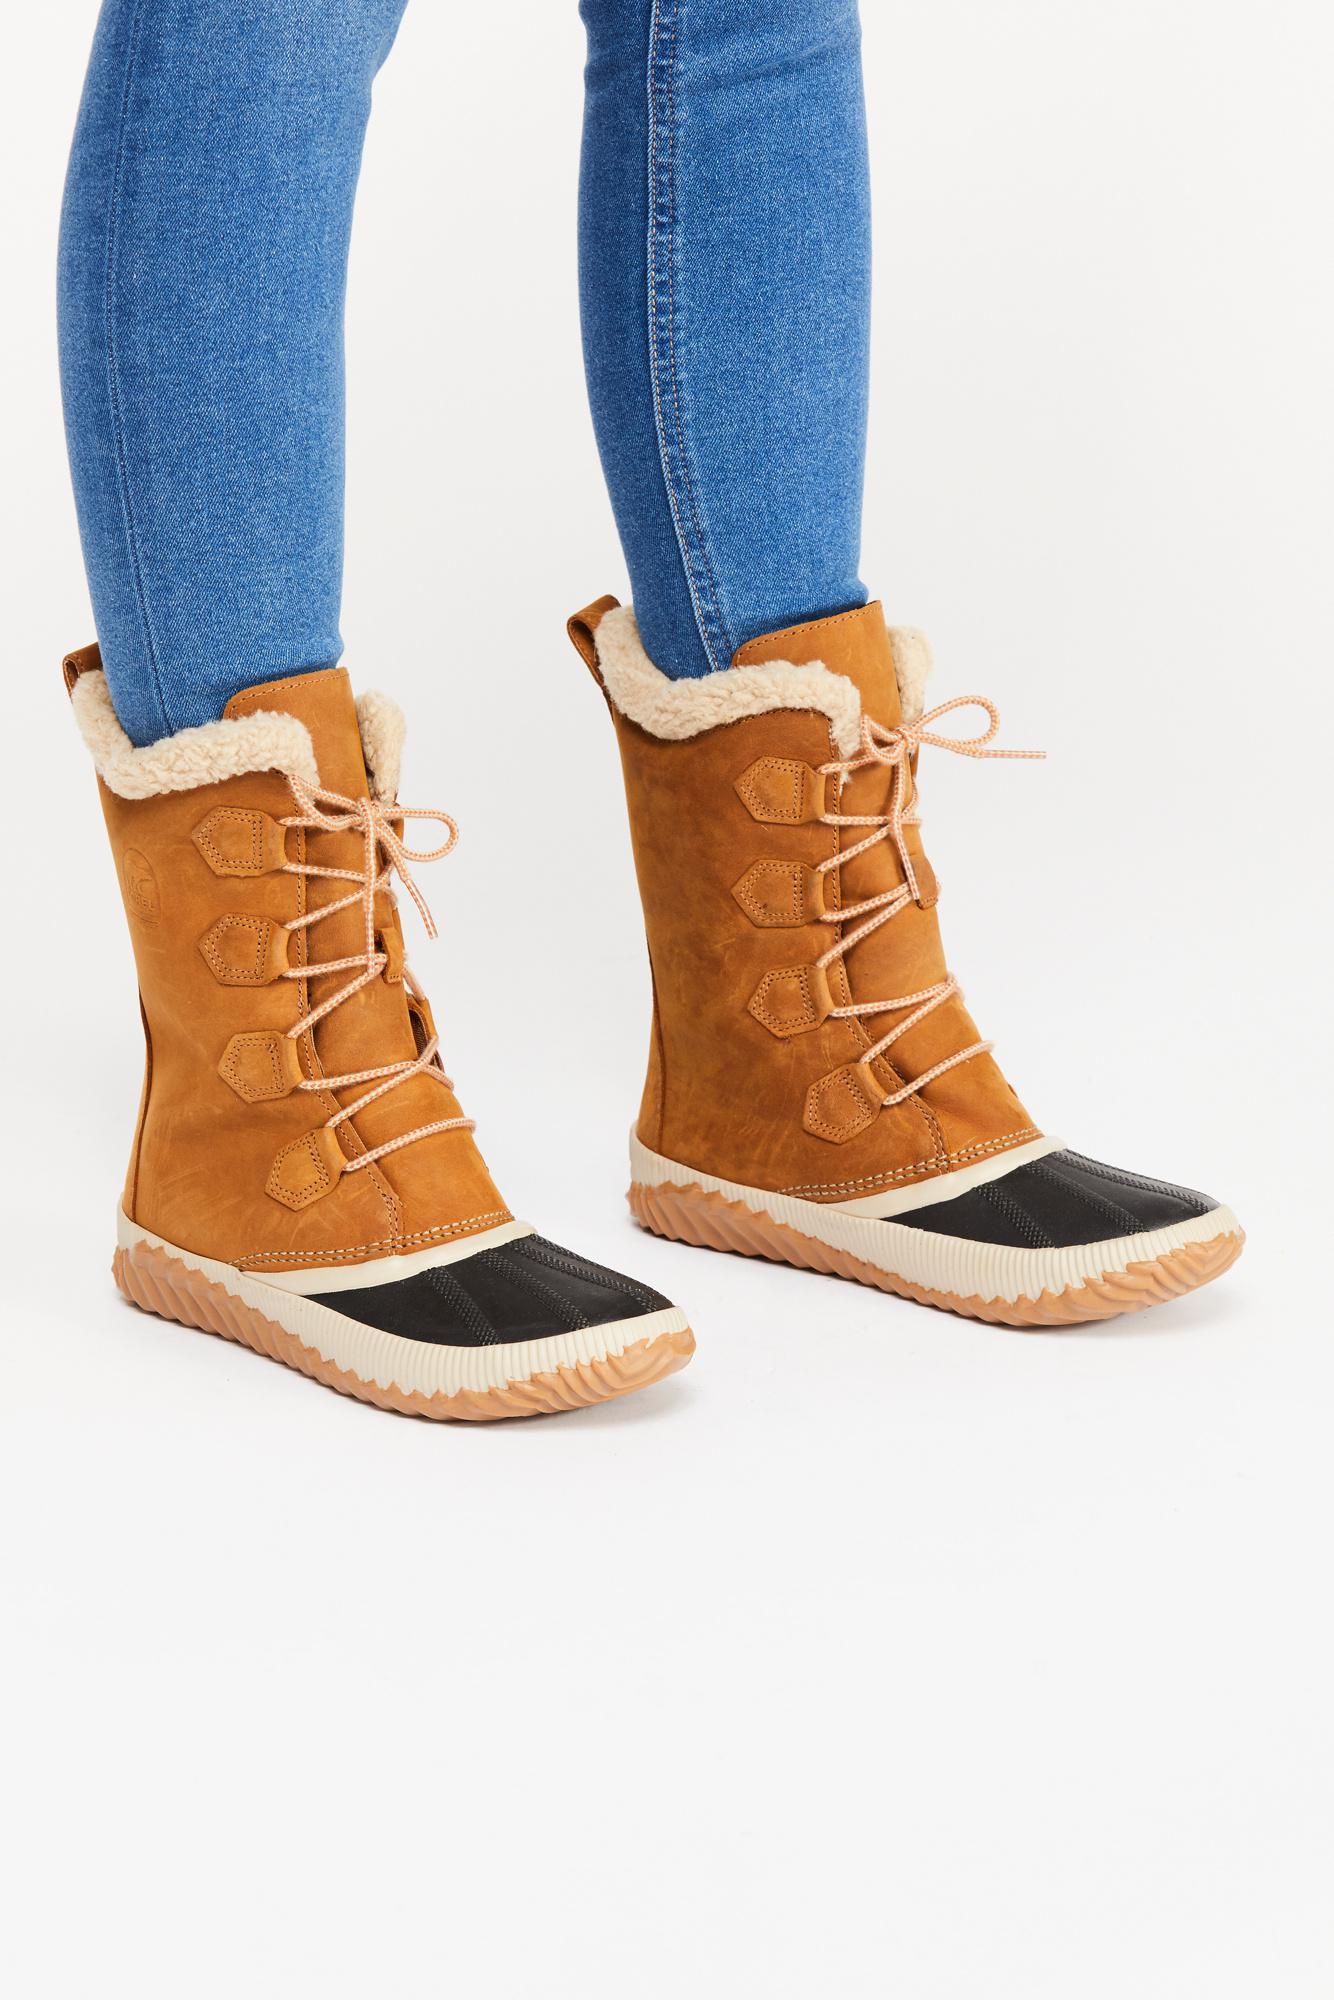 Tall Weather Boot By Sorel in Tan 